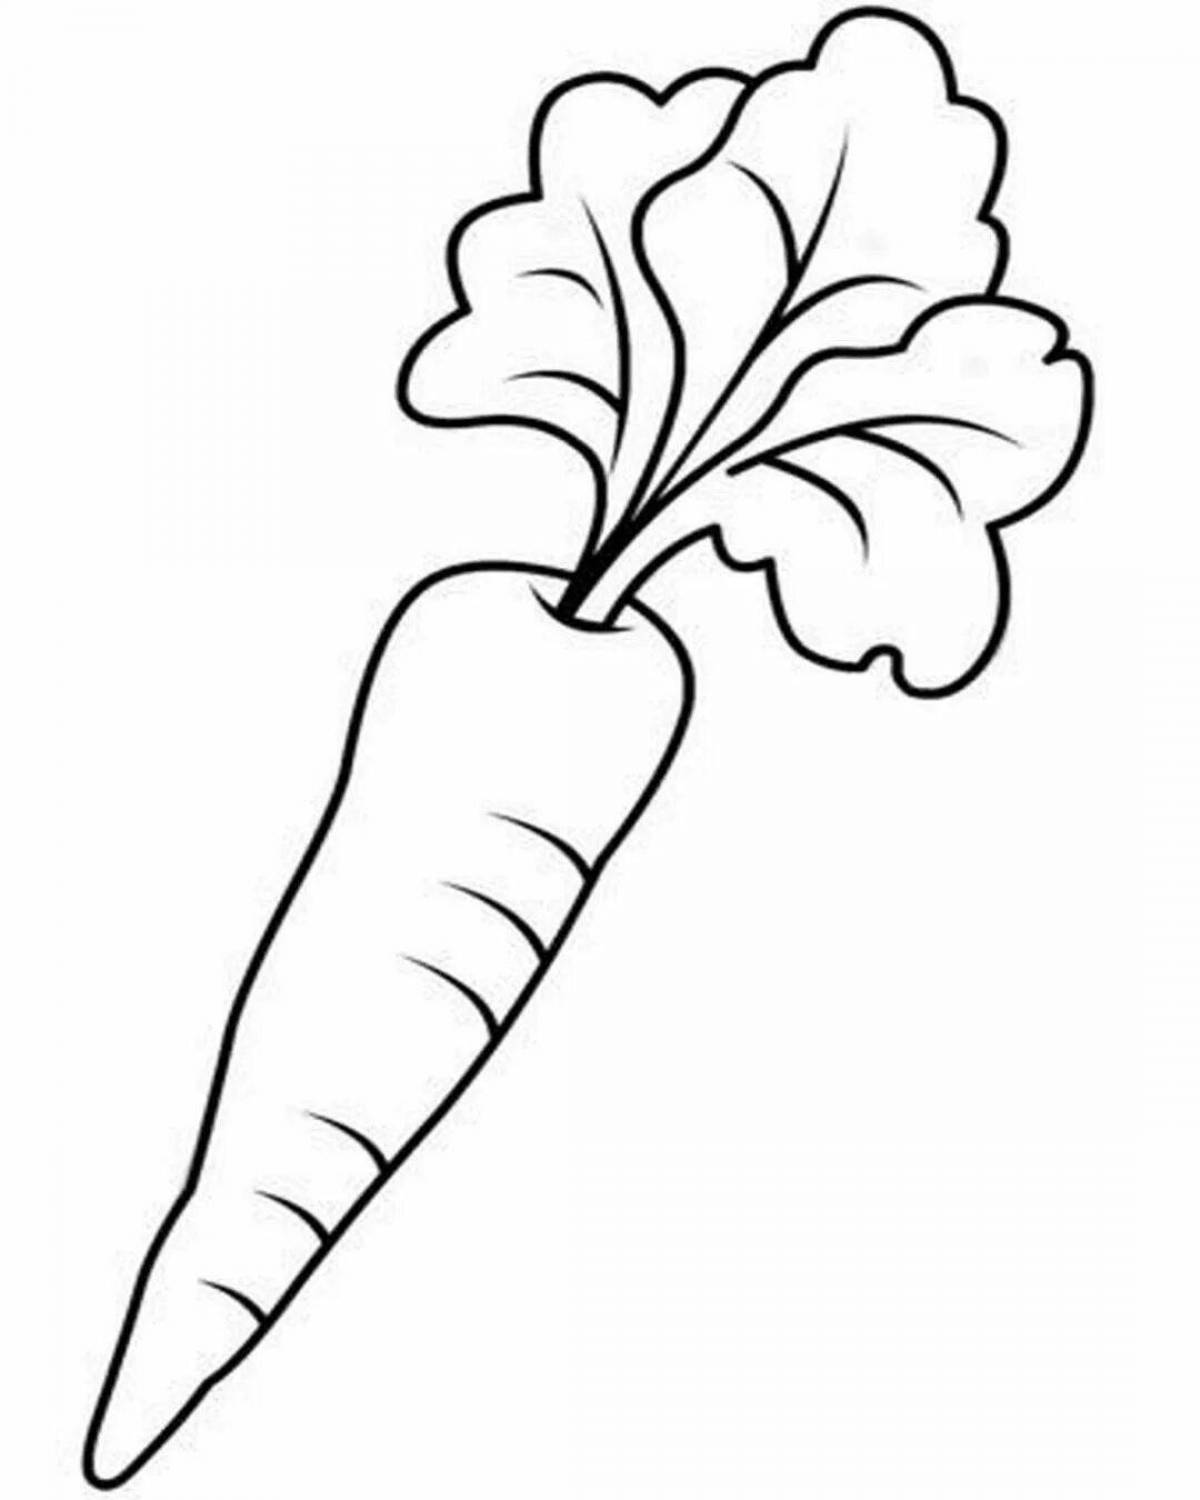 Fun vegetable coloring book for 4-5 year olds